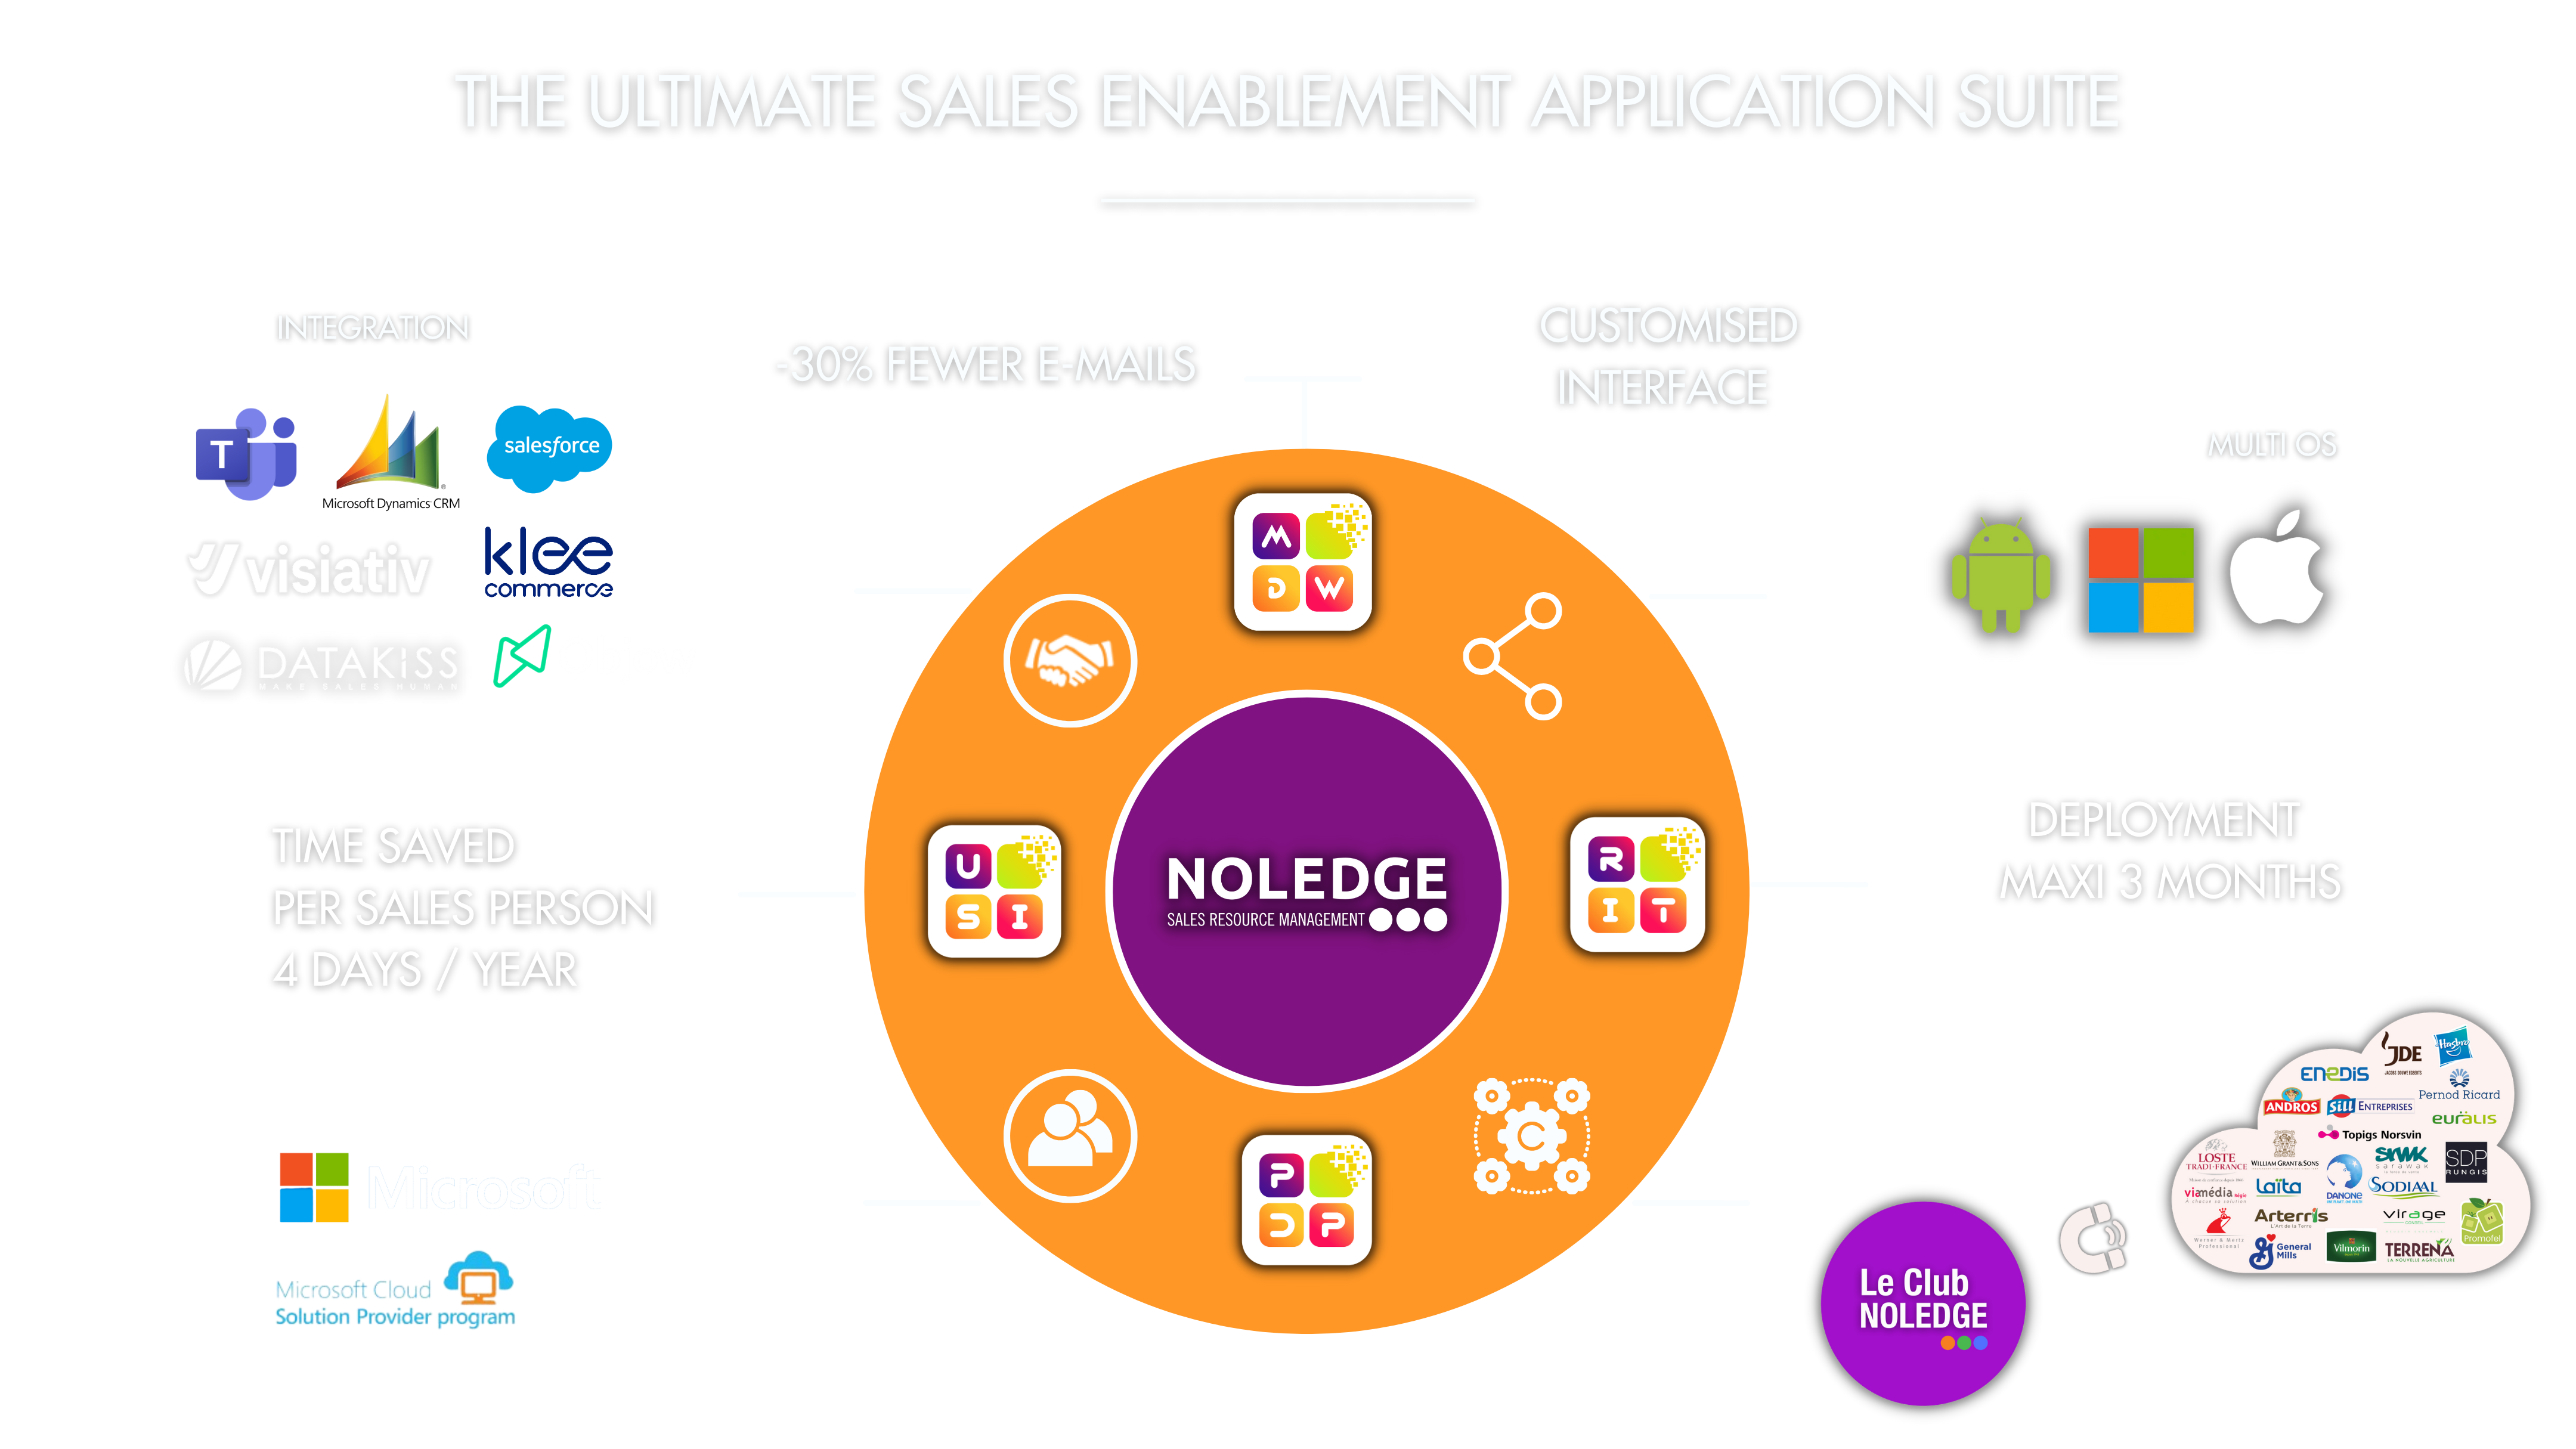 The Ultimate Sales Enablement Application Suite